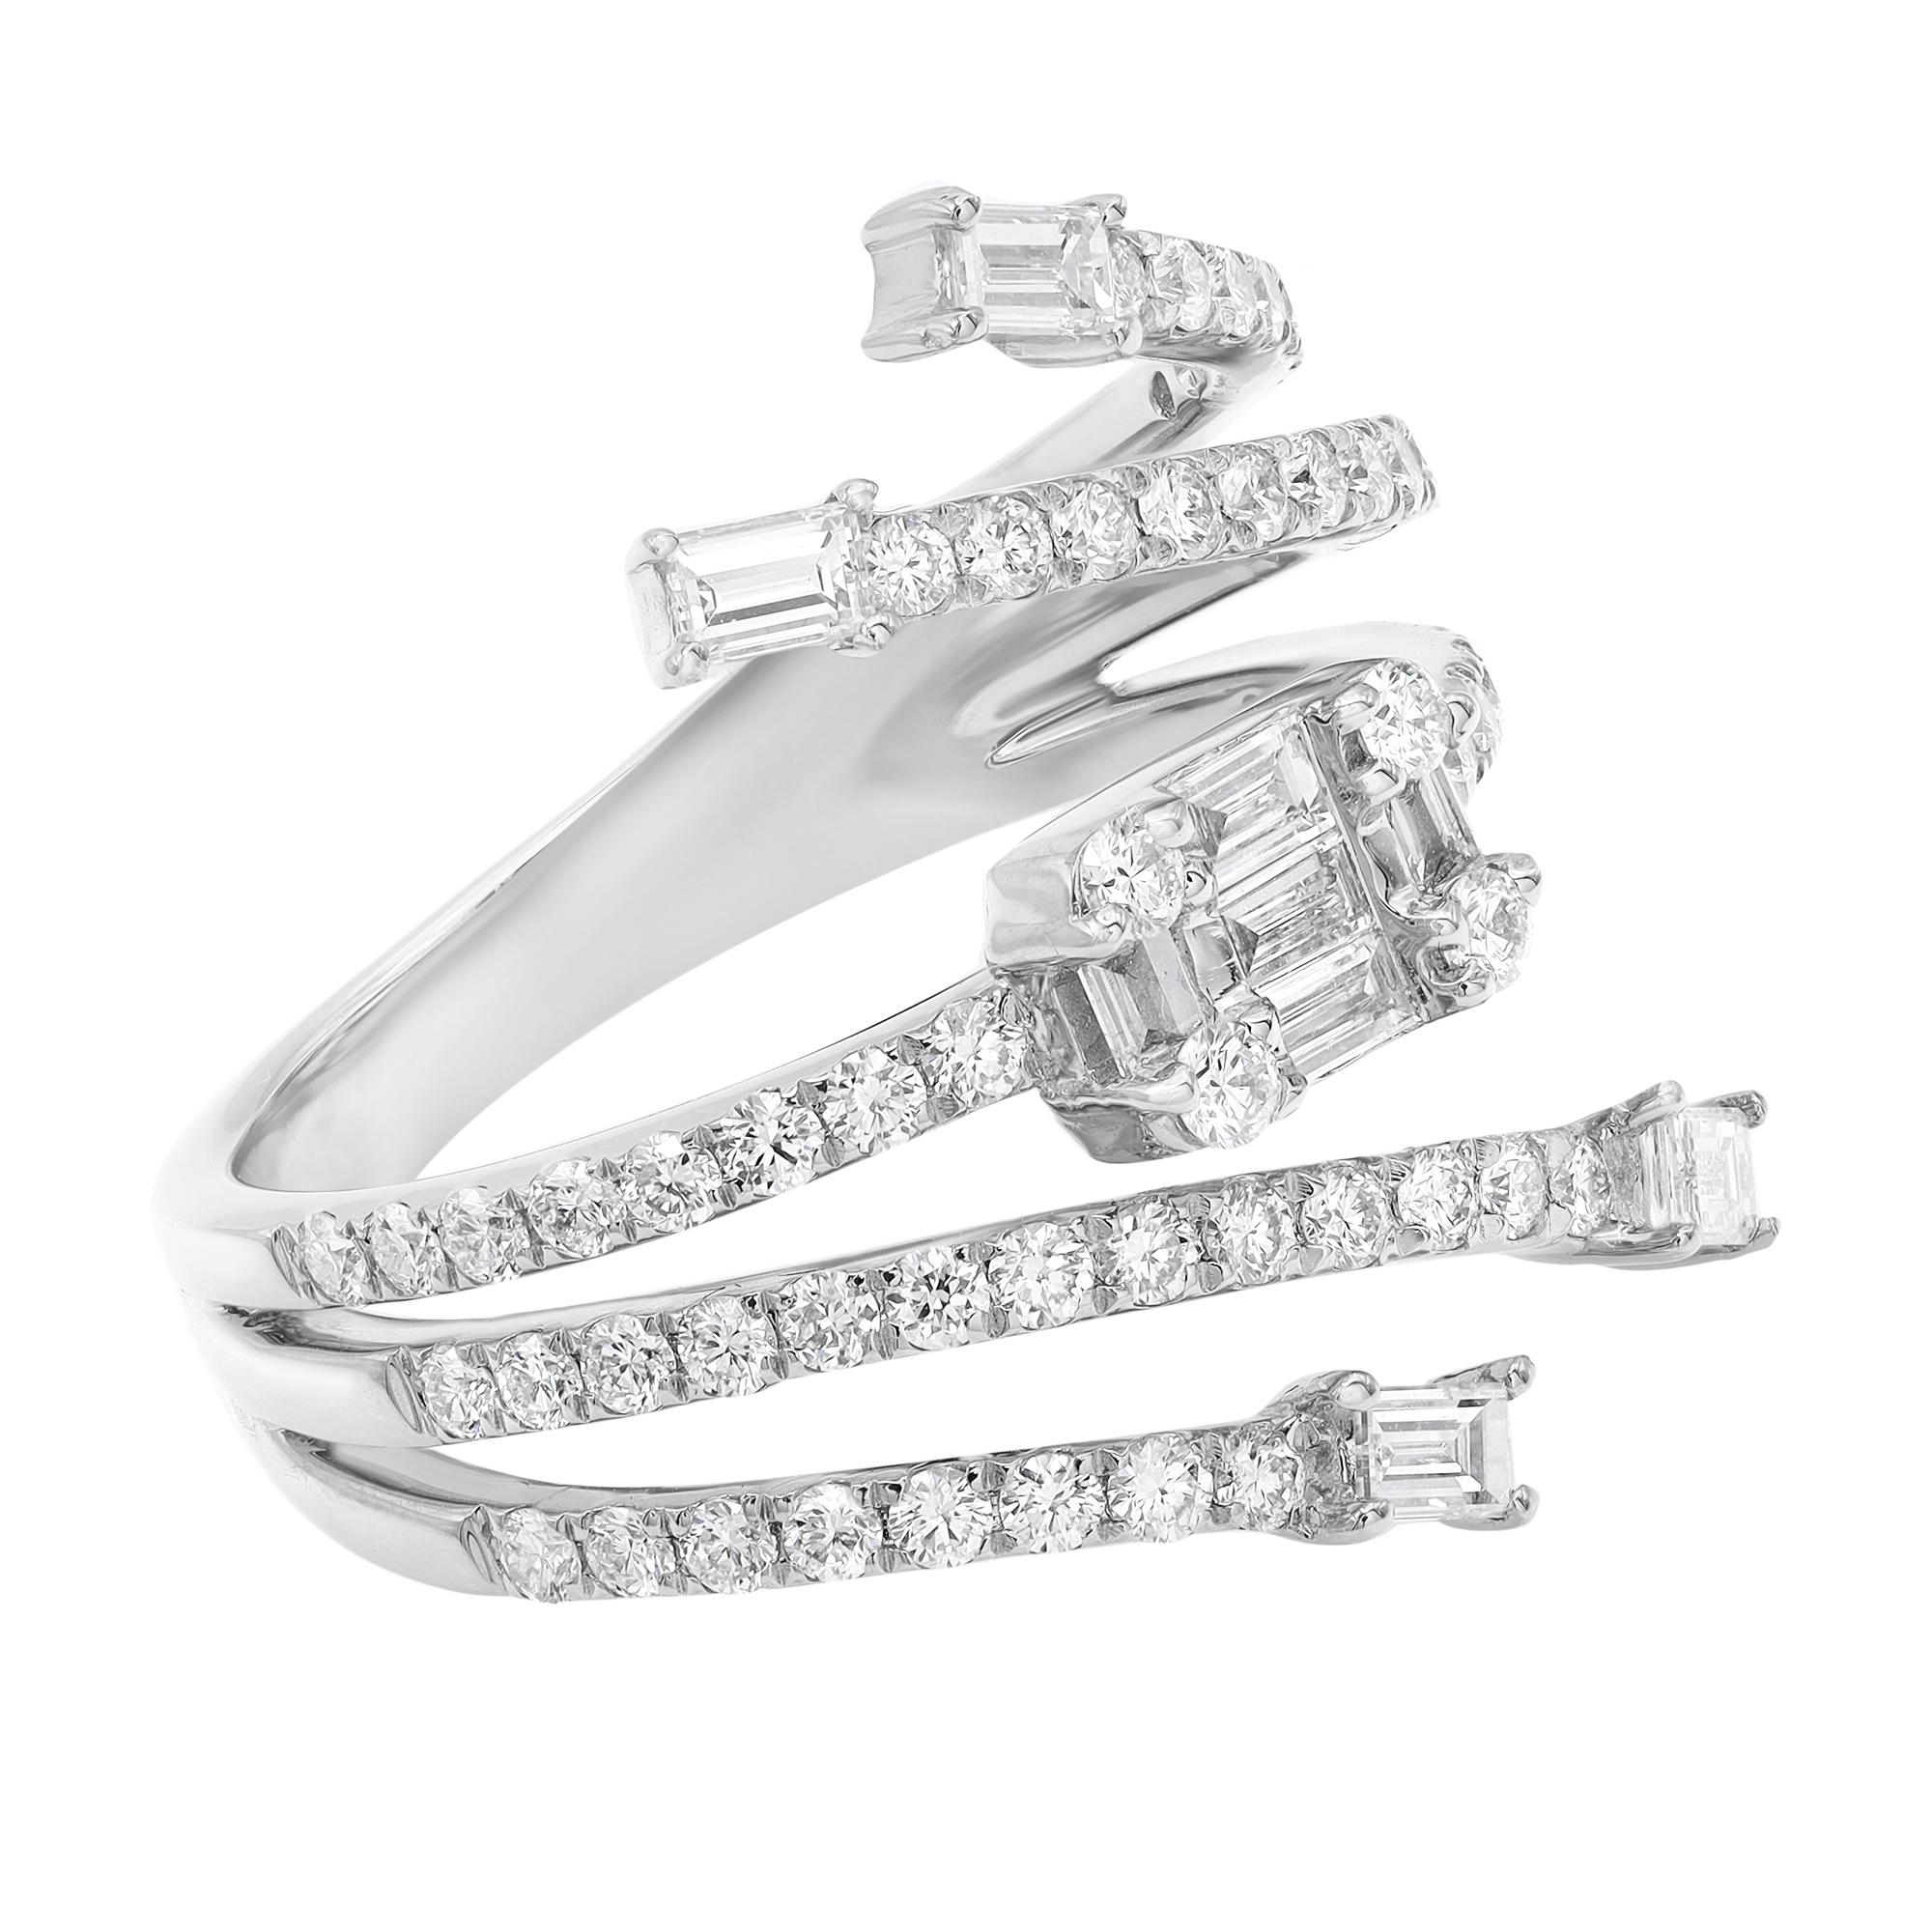 This stunning diamond ring comes with a flashy statement look. A must have in your jewelry collection. Crafted in 18K white gold. This ring features baguette and round cut diamonds weighing 1.20 carats in prong and channel setting. Diamond color G-H